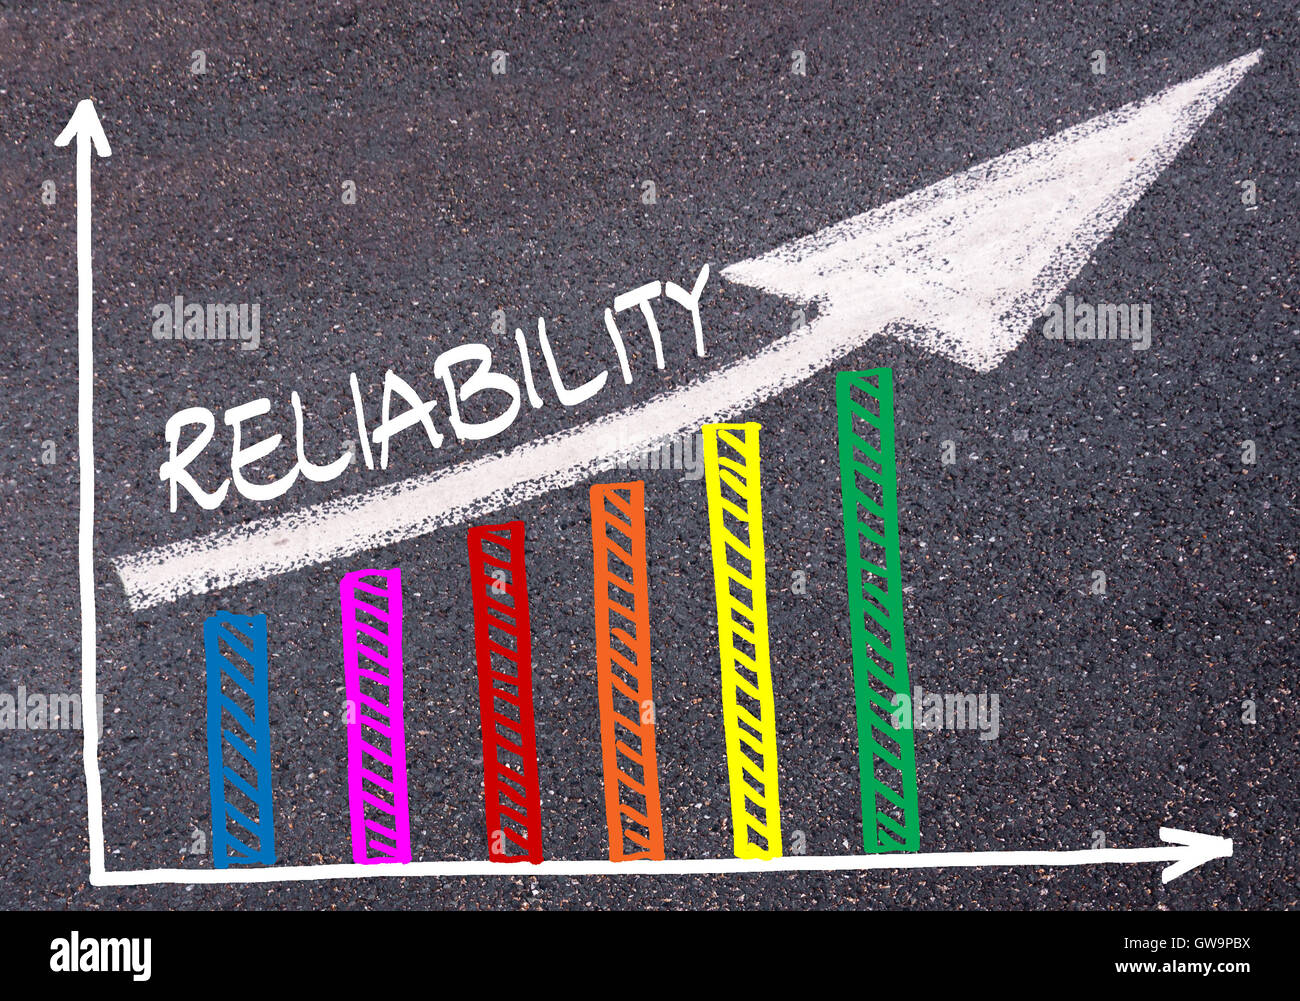 Colorful graph drawn over tarmac and word RELIABILITY with directional arrow, business design concept Stock Photo